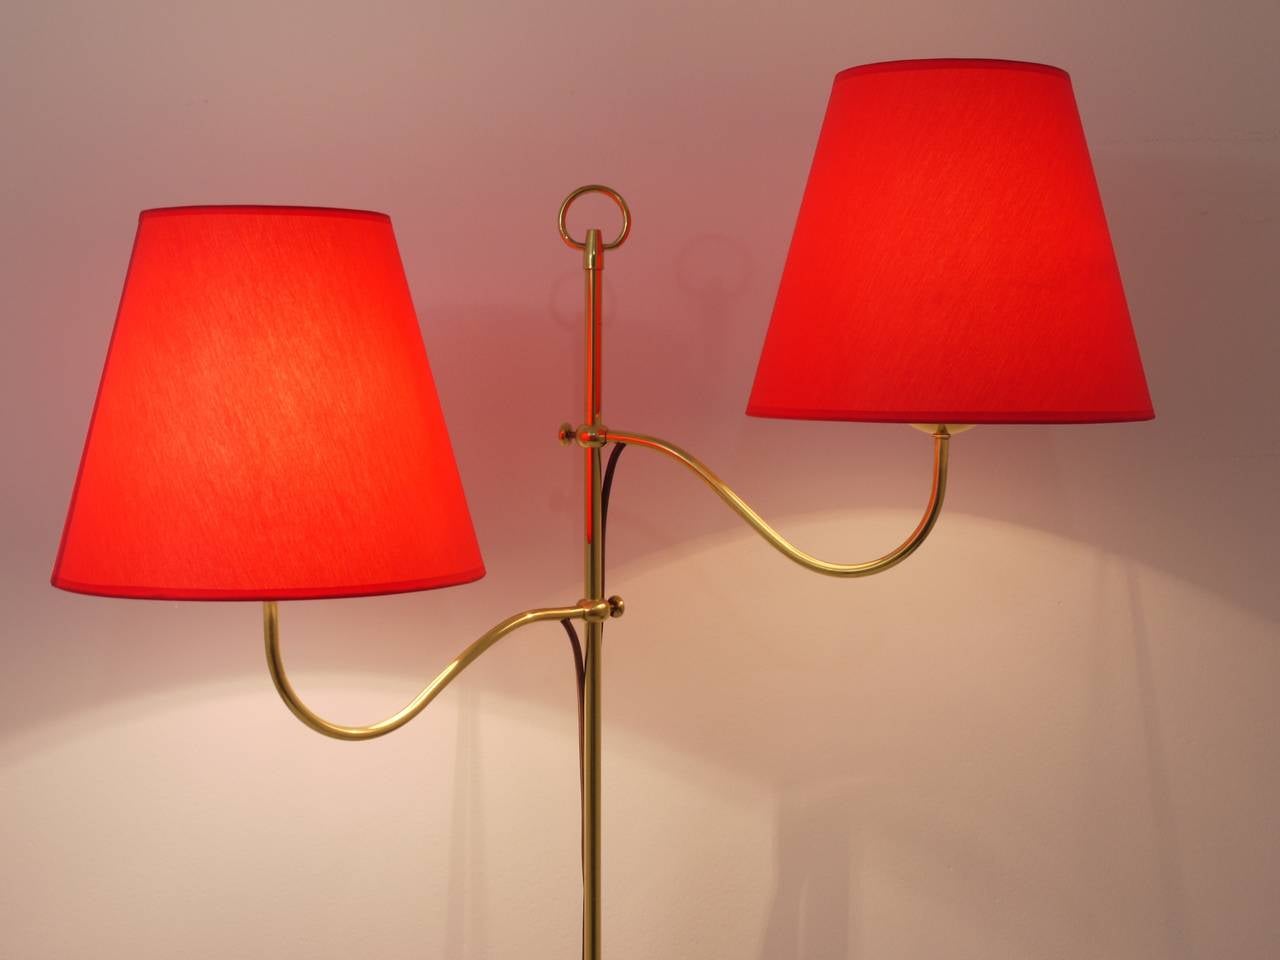 Elegant Two-Arms Mid-Century Brass Floor Lamp by Josef Frank, Austria, 1950 For Sale 4